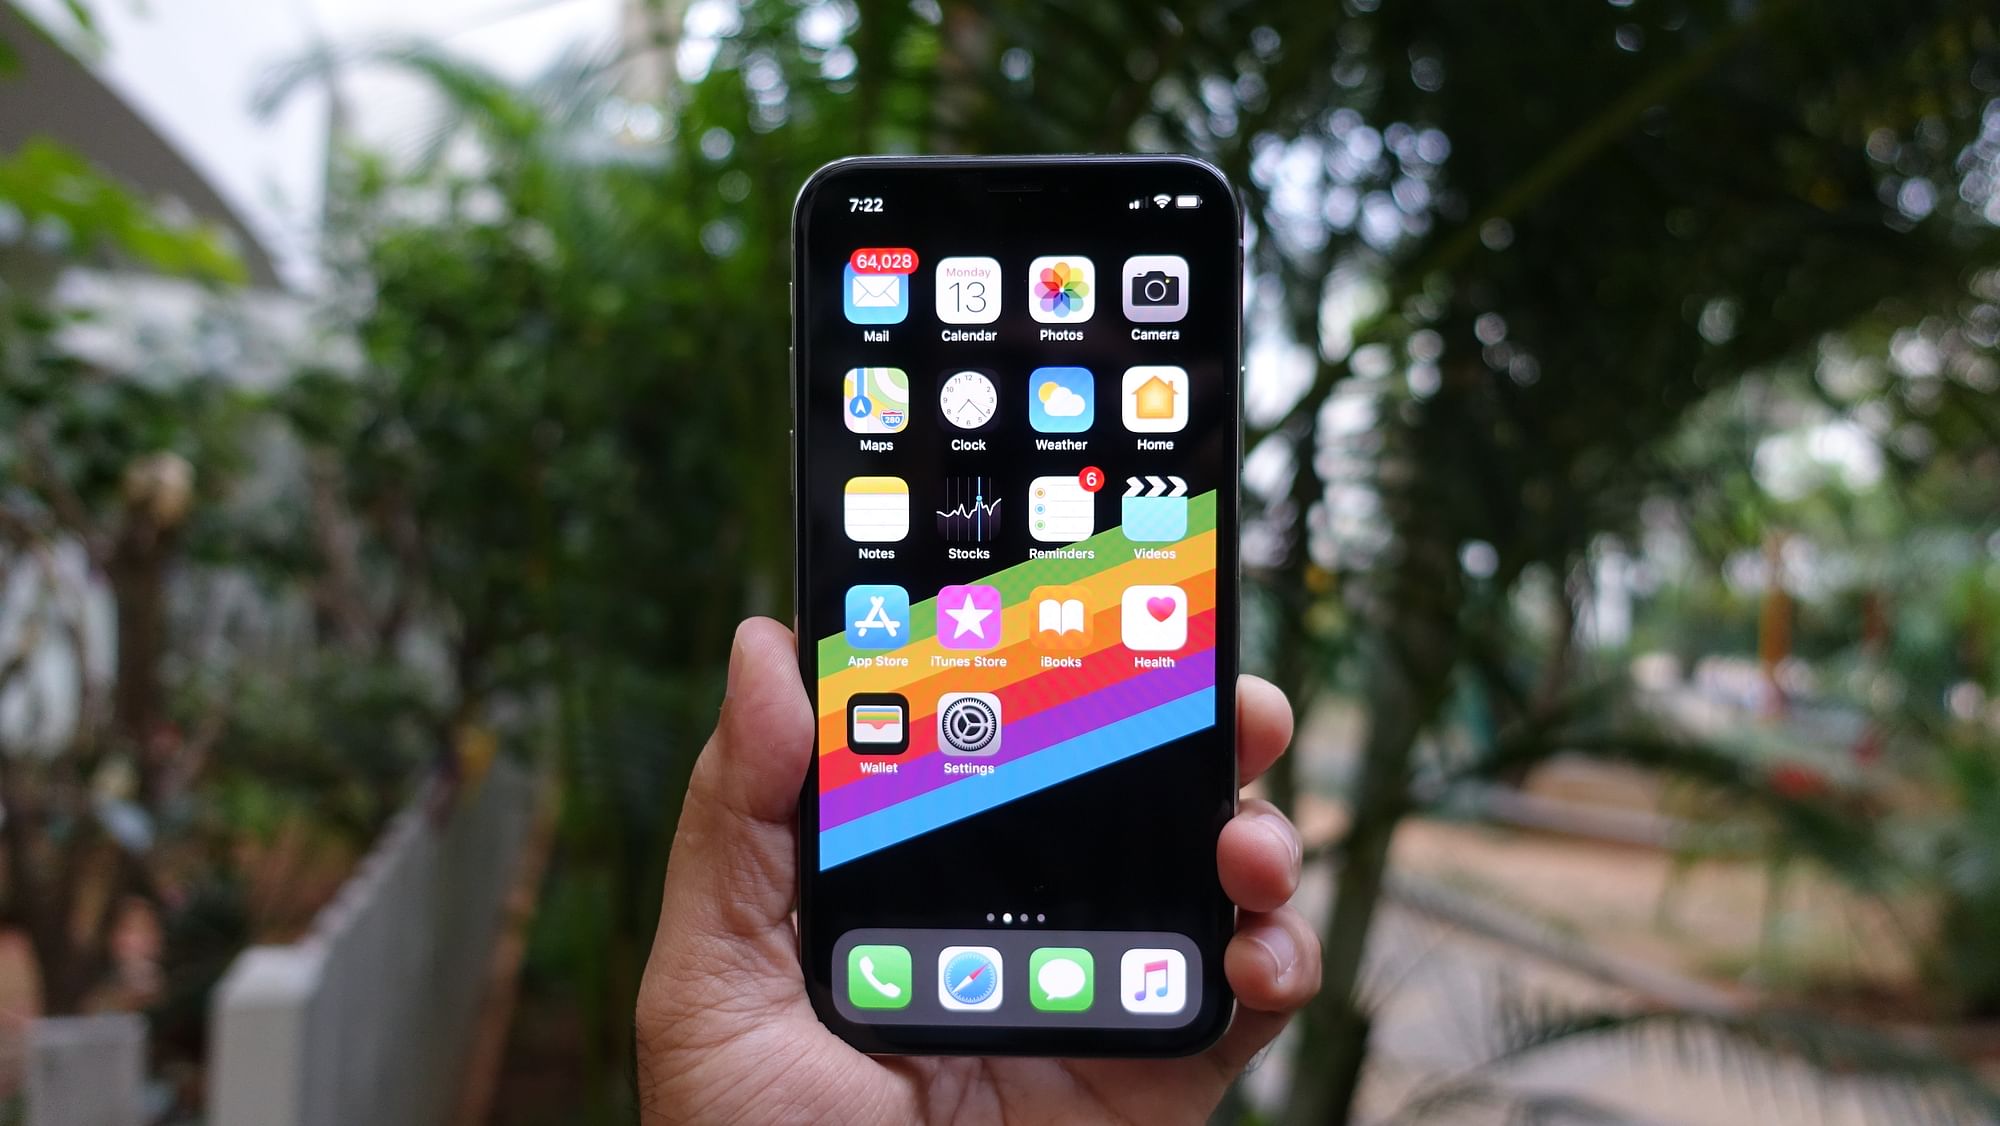 &nbsp; iPhone X comes with a 5.8-inch OLED screen.